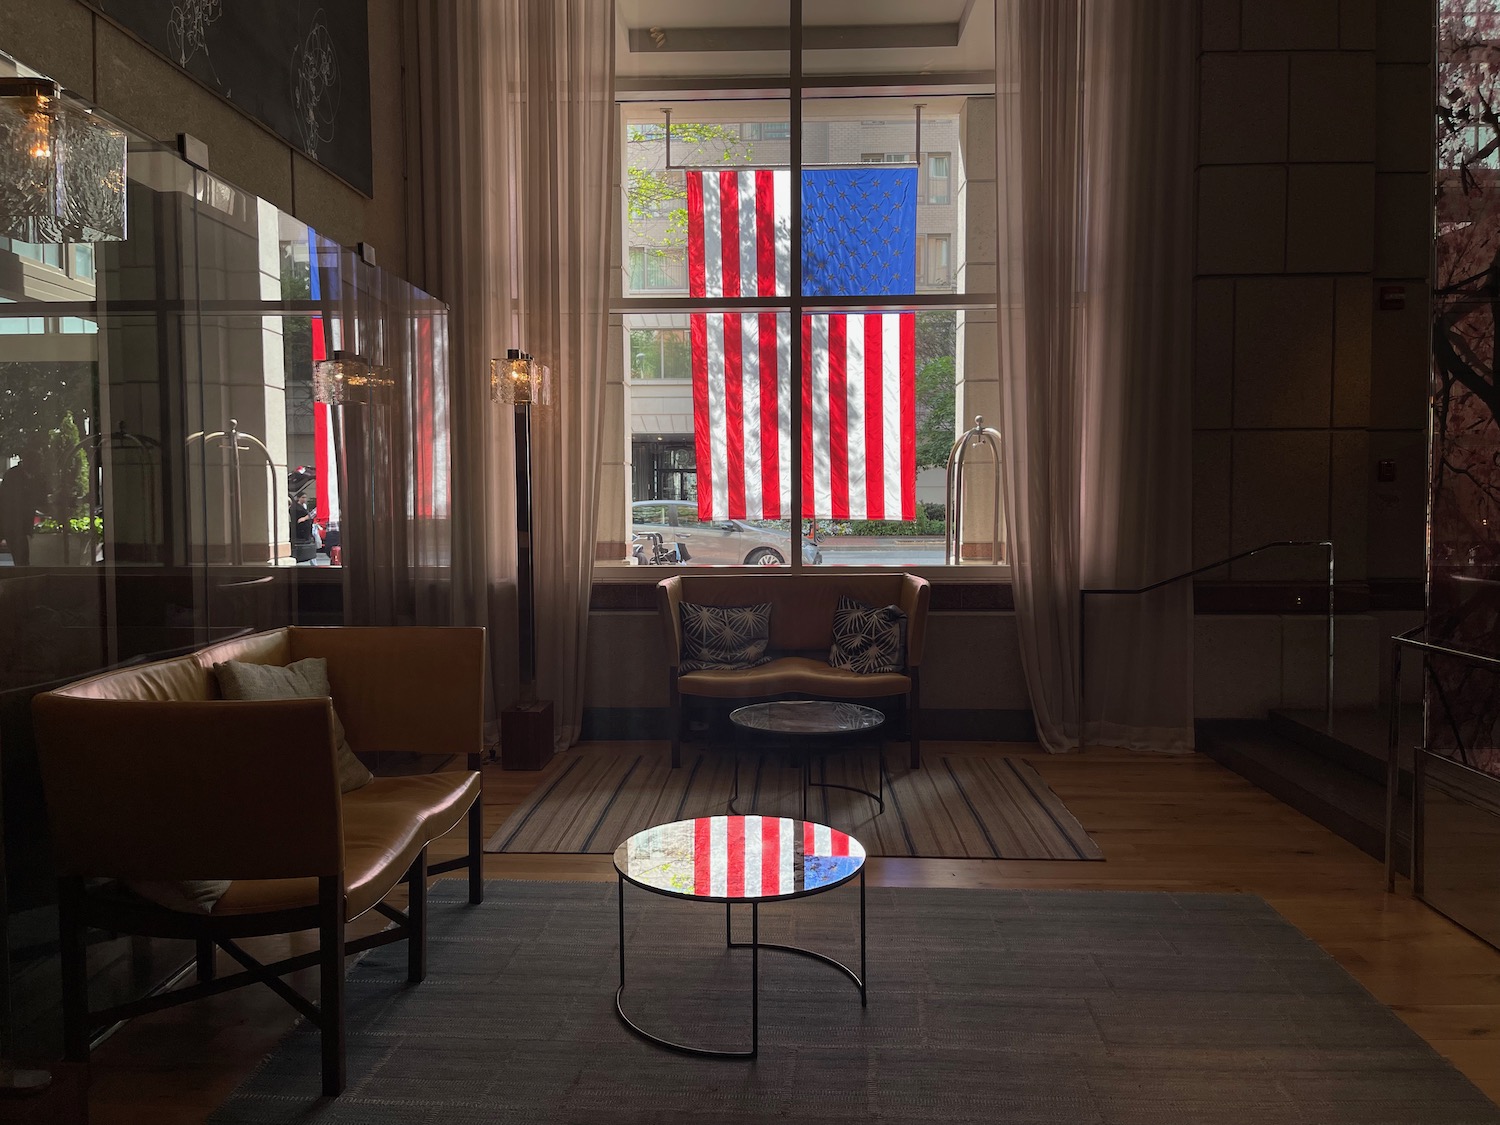 a room with a flag in the window